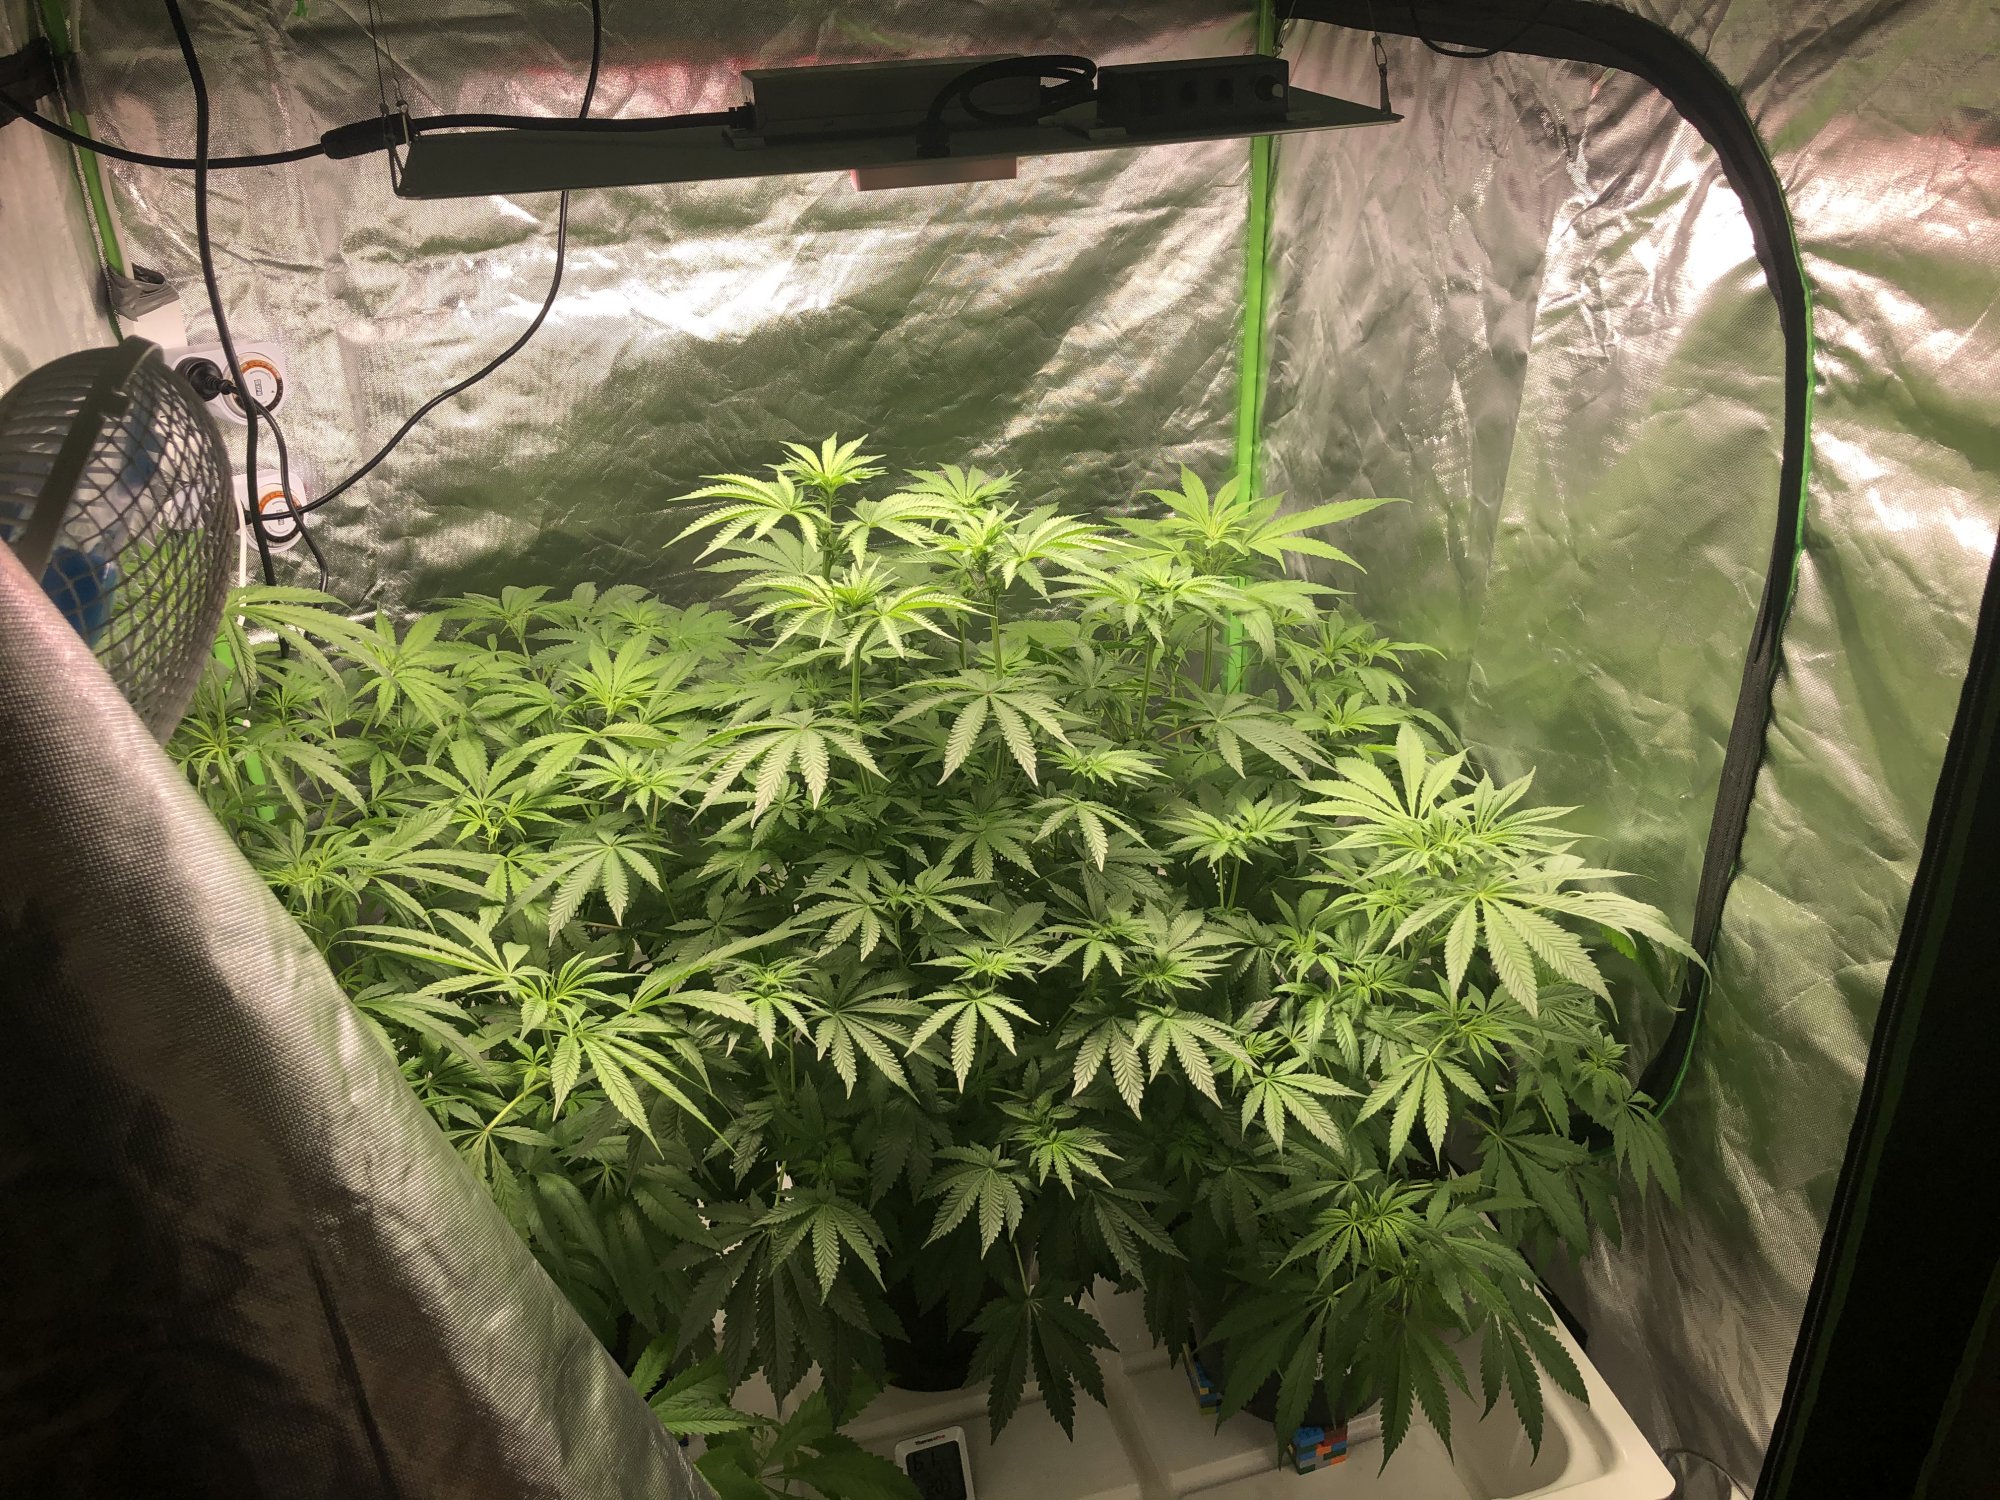 Thoughts on my second grow 3